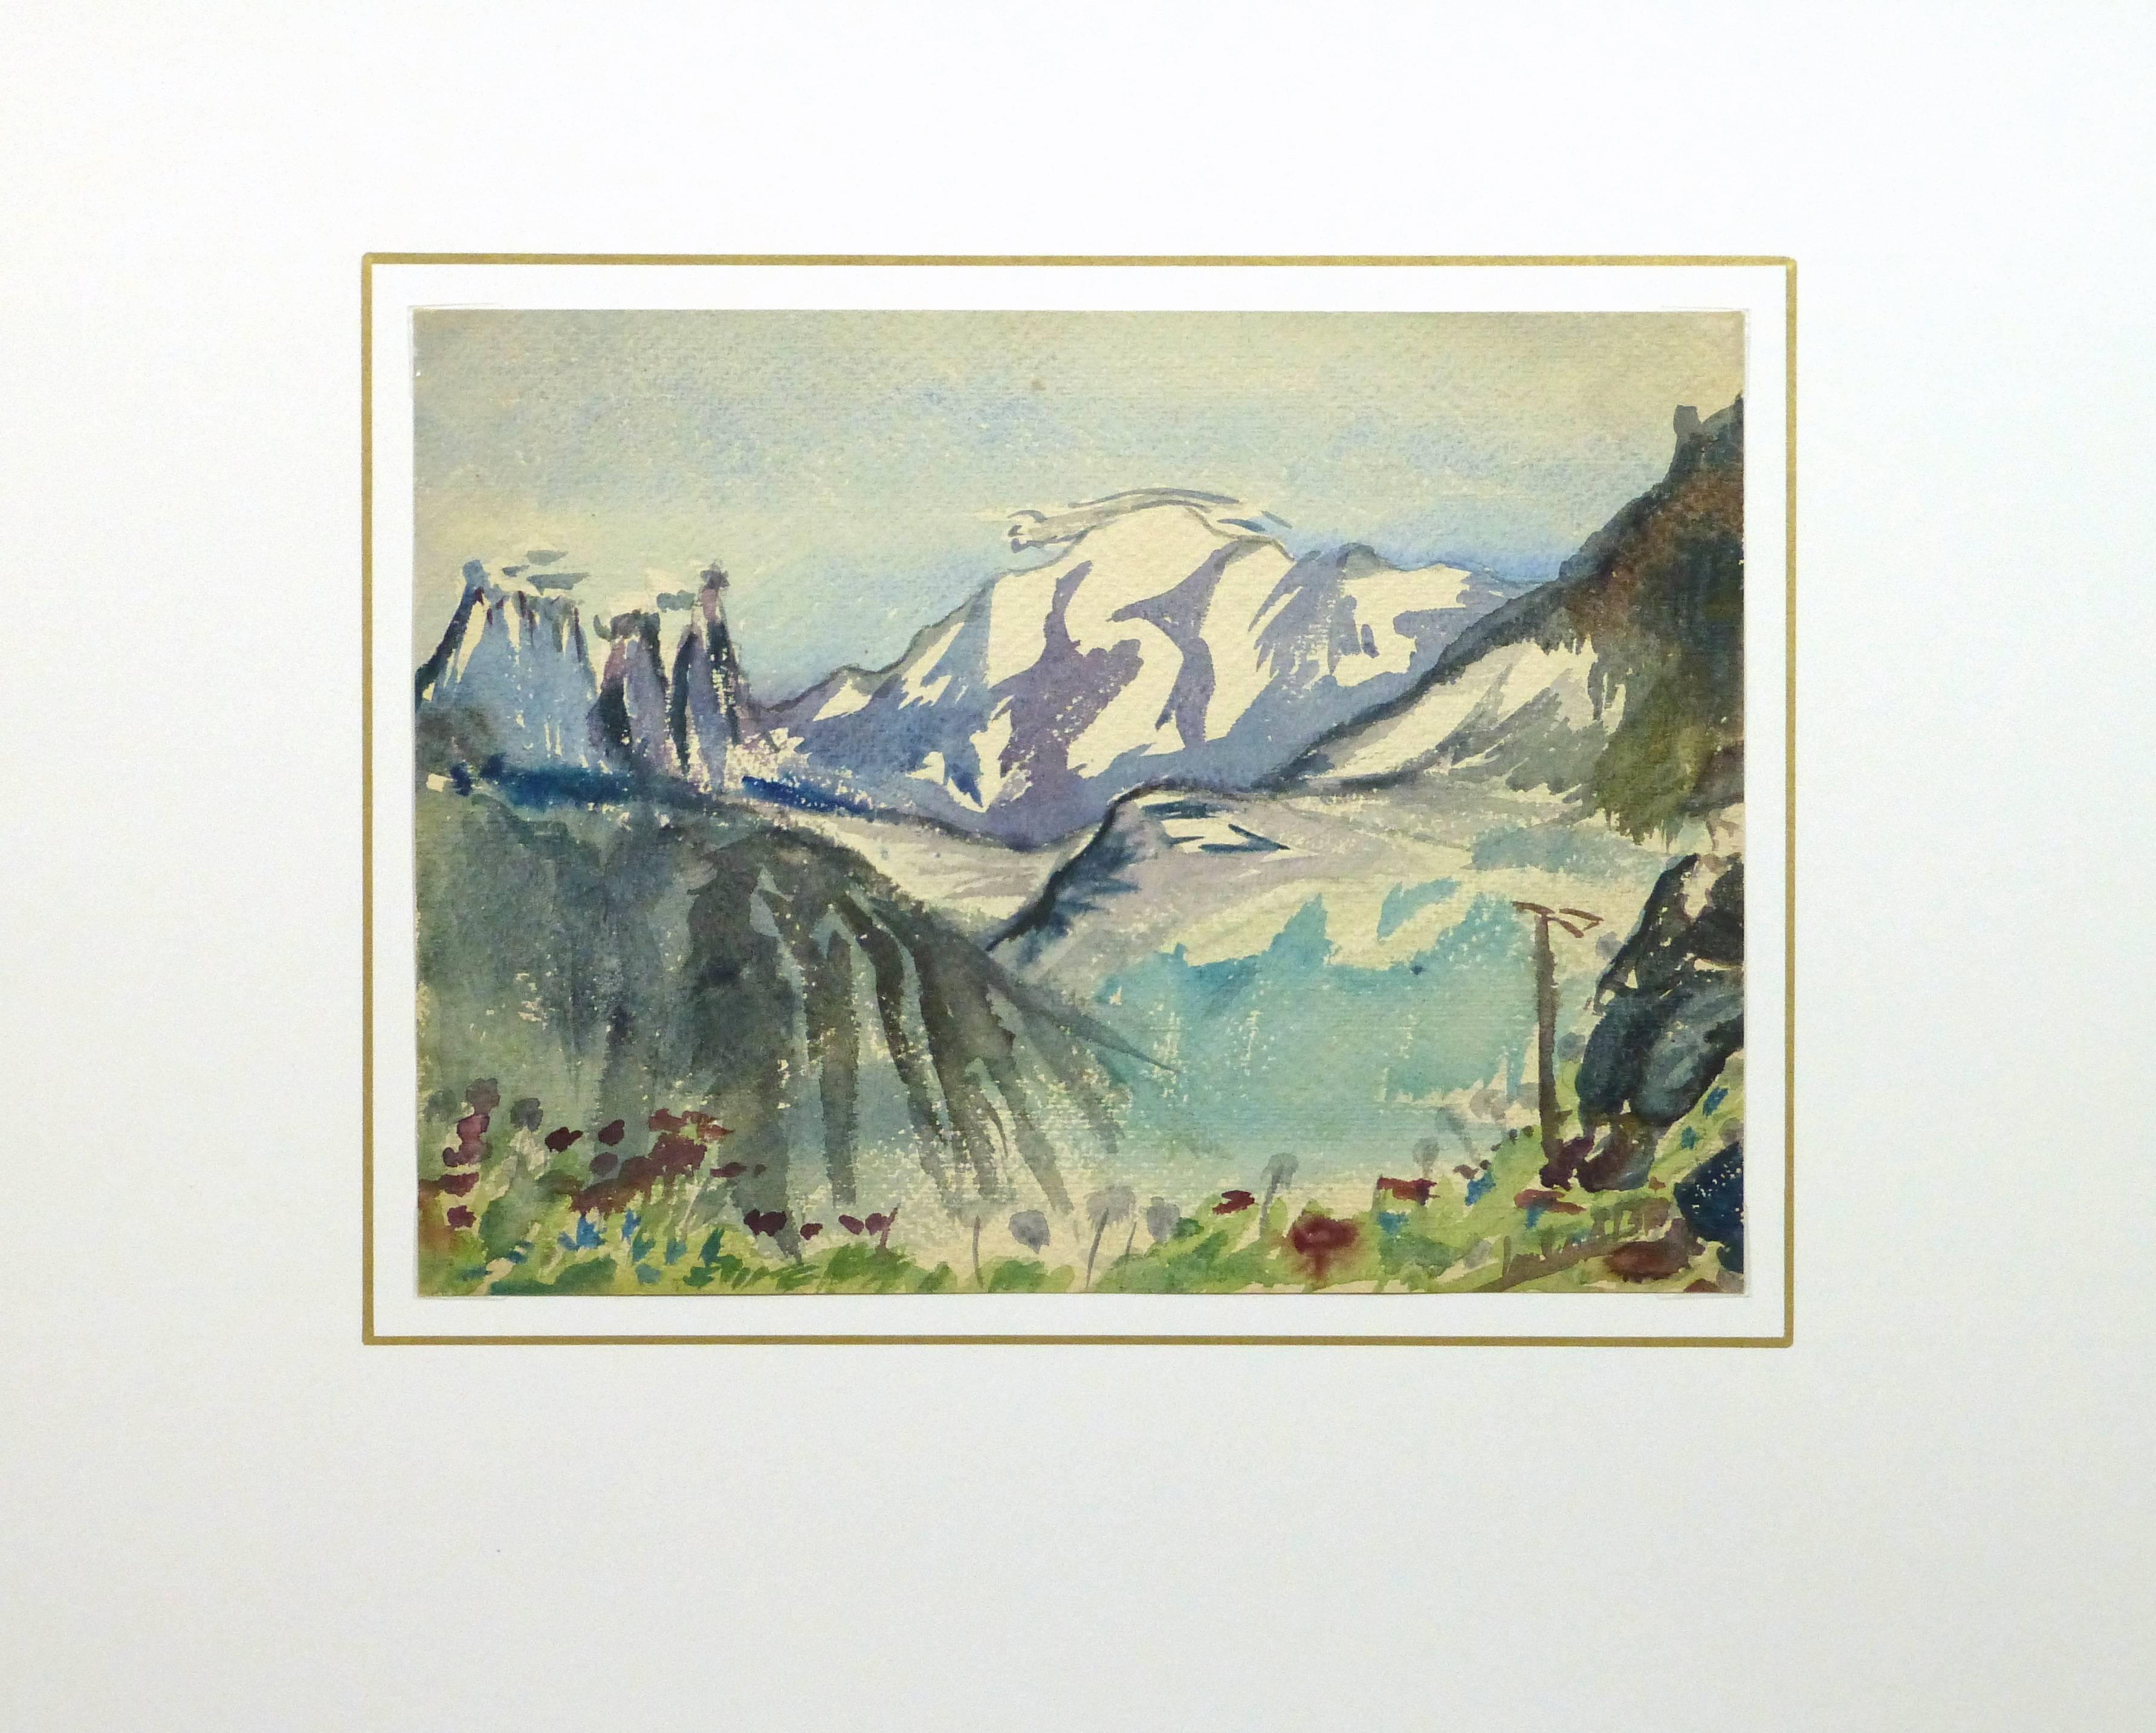 Lovely shades of blue, green, and gray characterize this vintage French watercolor of a meadow bordering a vast, snow-capped mountain range, circa 1950.

Original artwork on paper displayed on a white mat with a gold border. Mat fits a standard-size